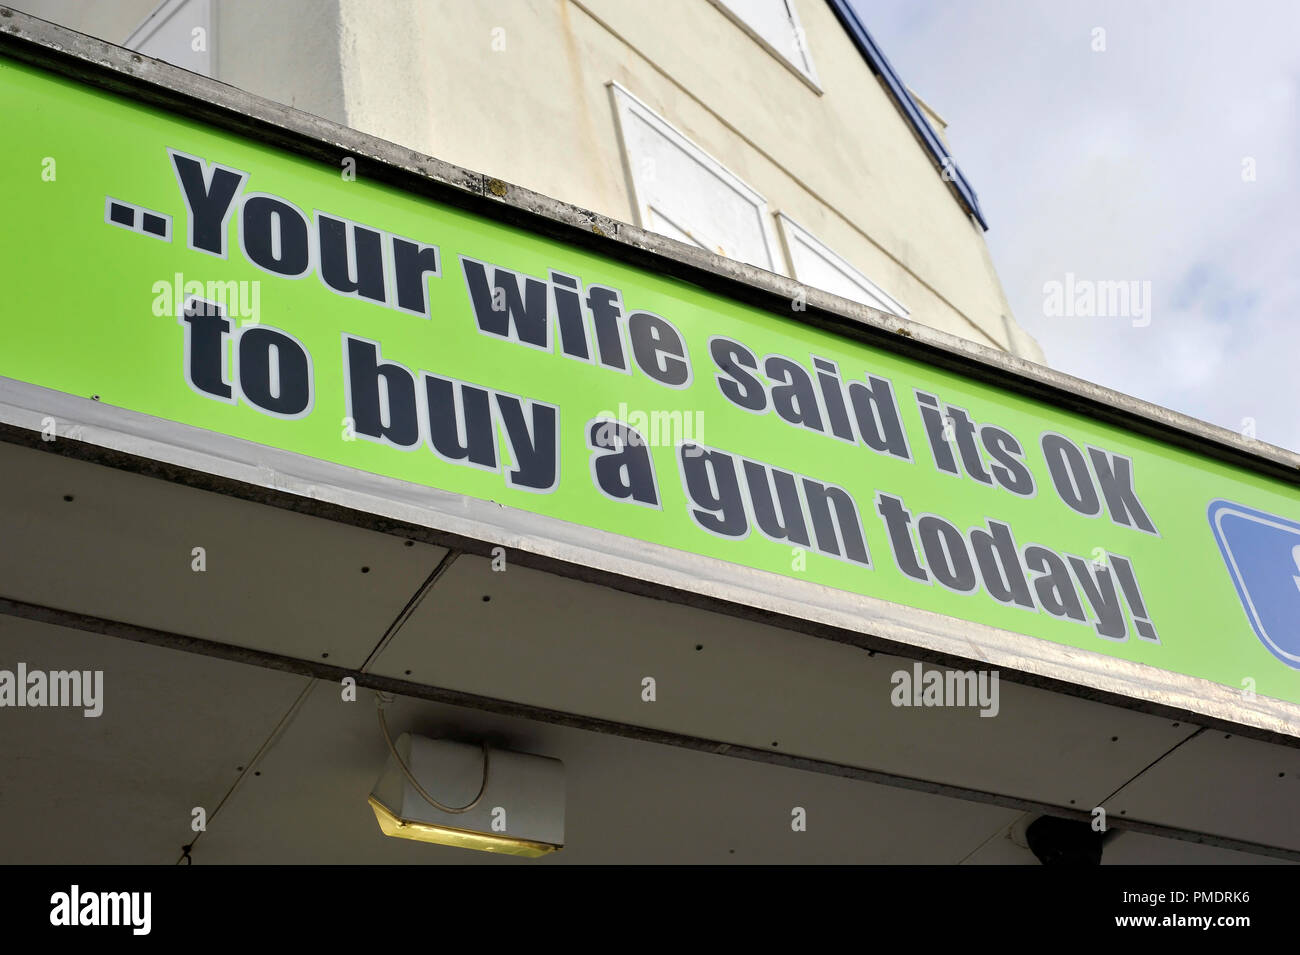 Your wife said its ok to buy a gun today Stock Photo